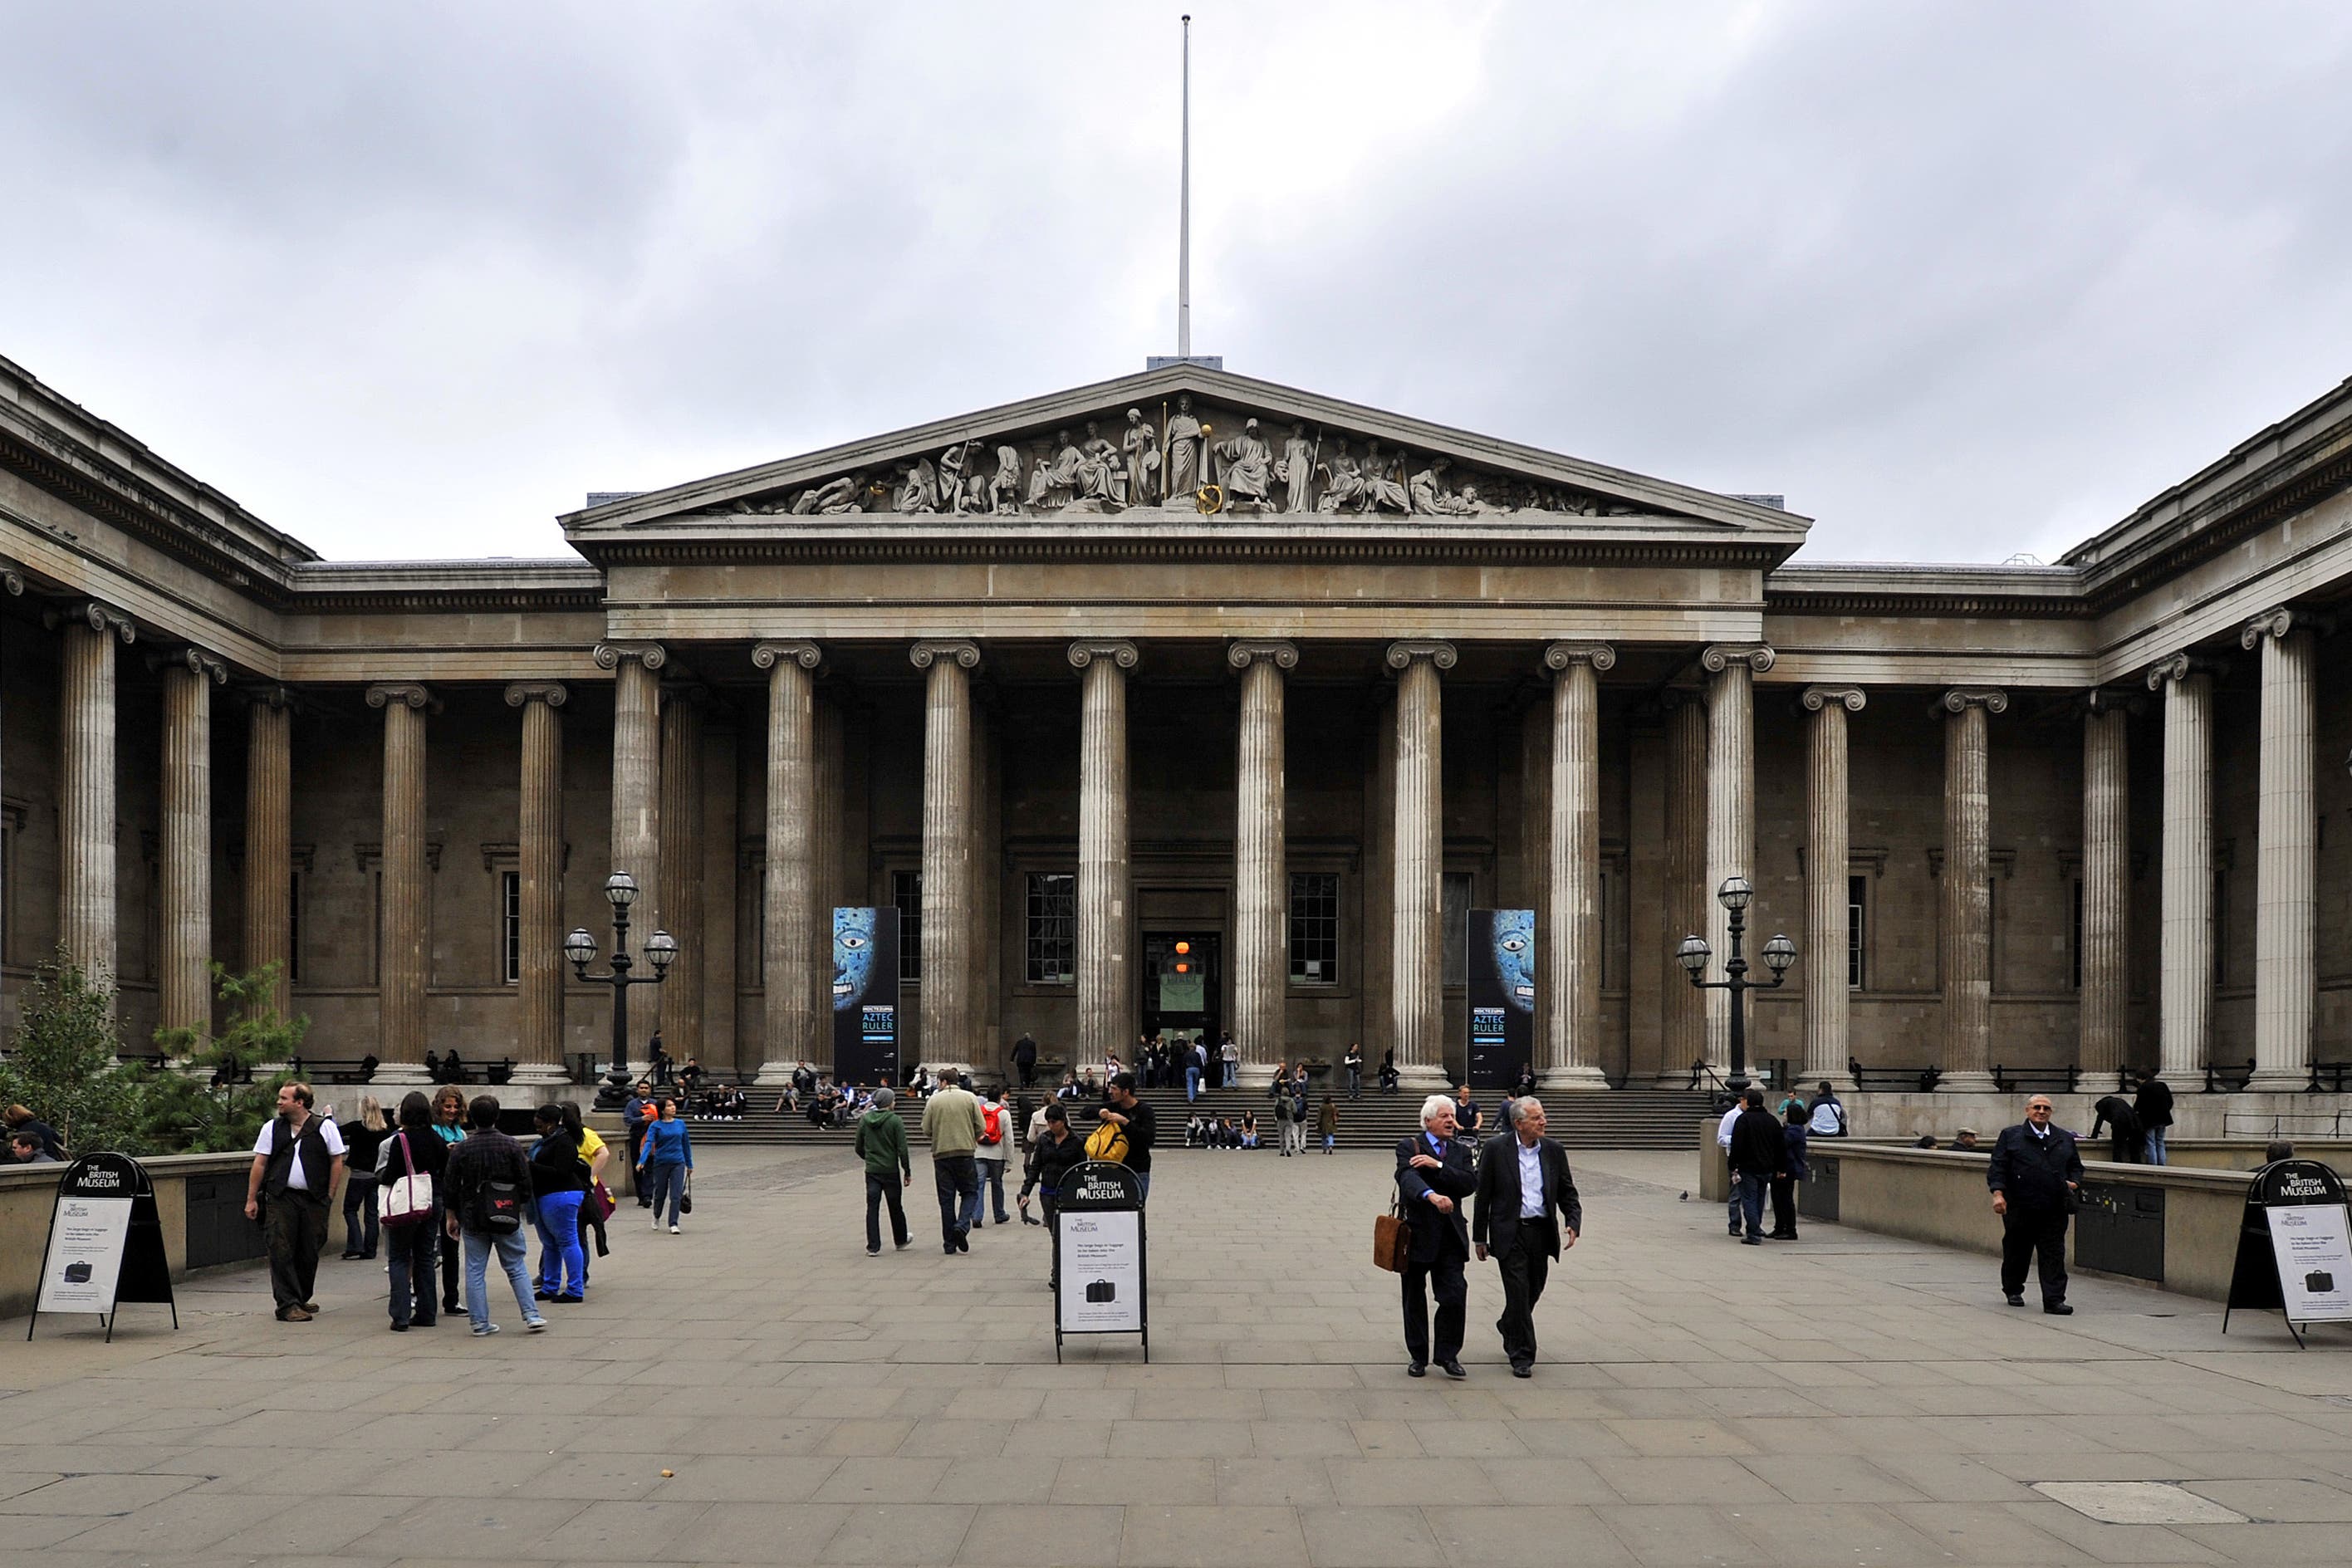 Hundreds of historical artefacts have gone missing from the British Museum since 2013, the institution’s records reportedly show (Tim Ireland/PA)